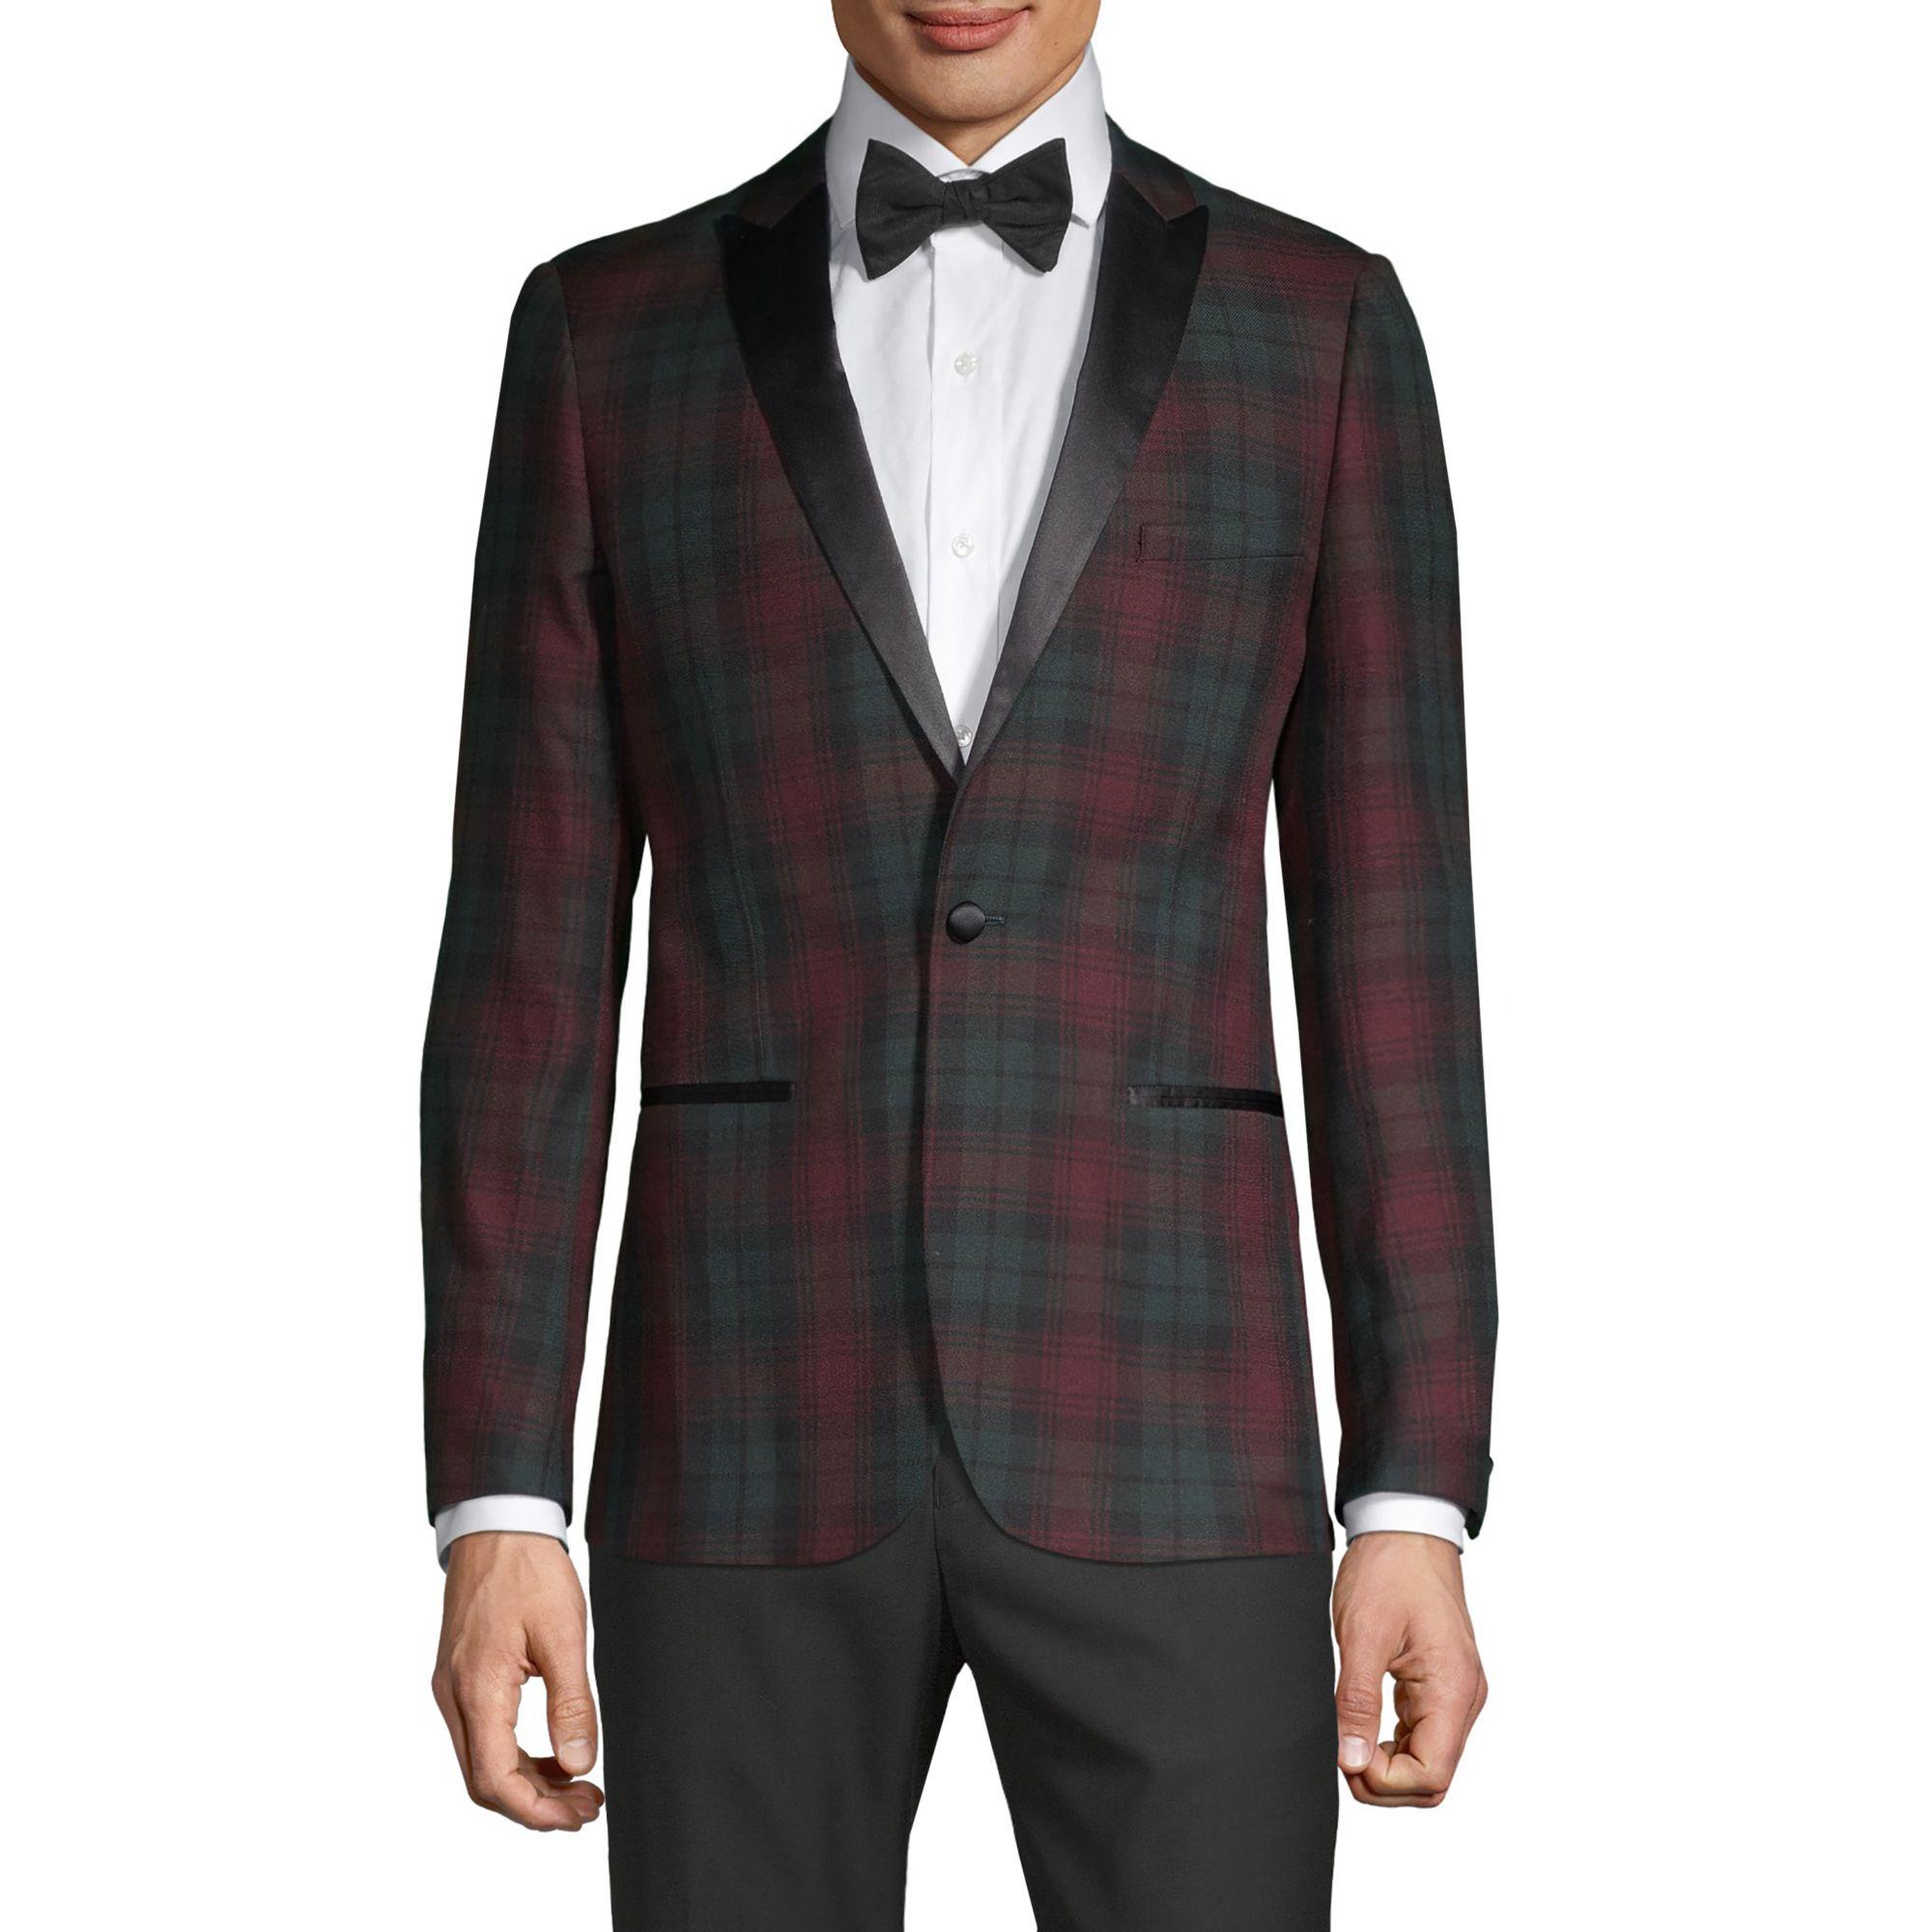 Paisley and Gray Plaid Dinner Jacket for Men - Lyst